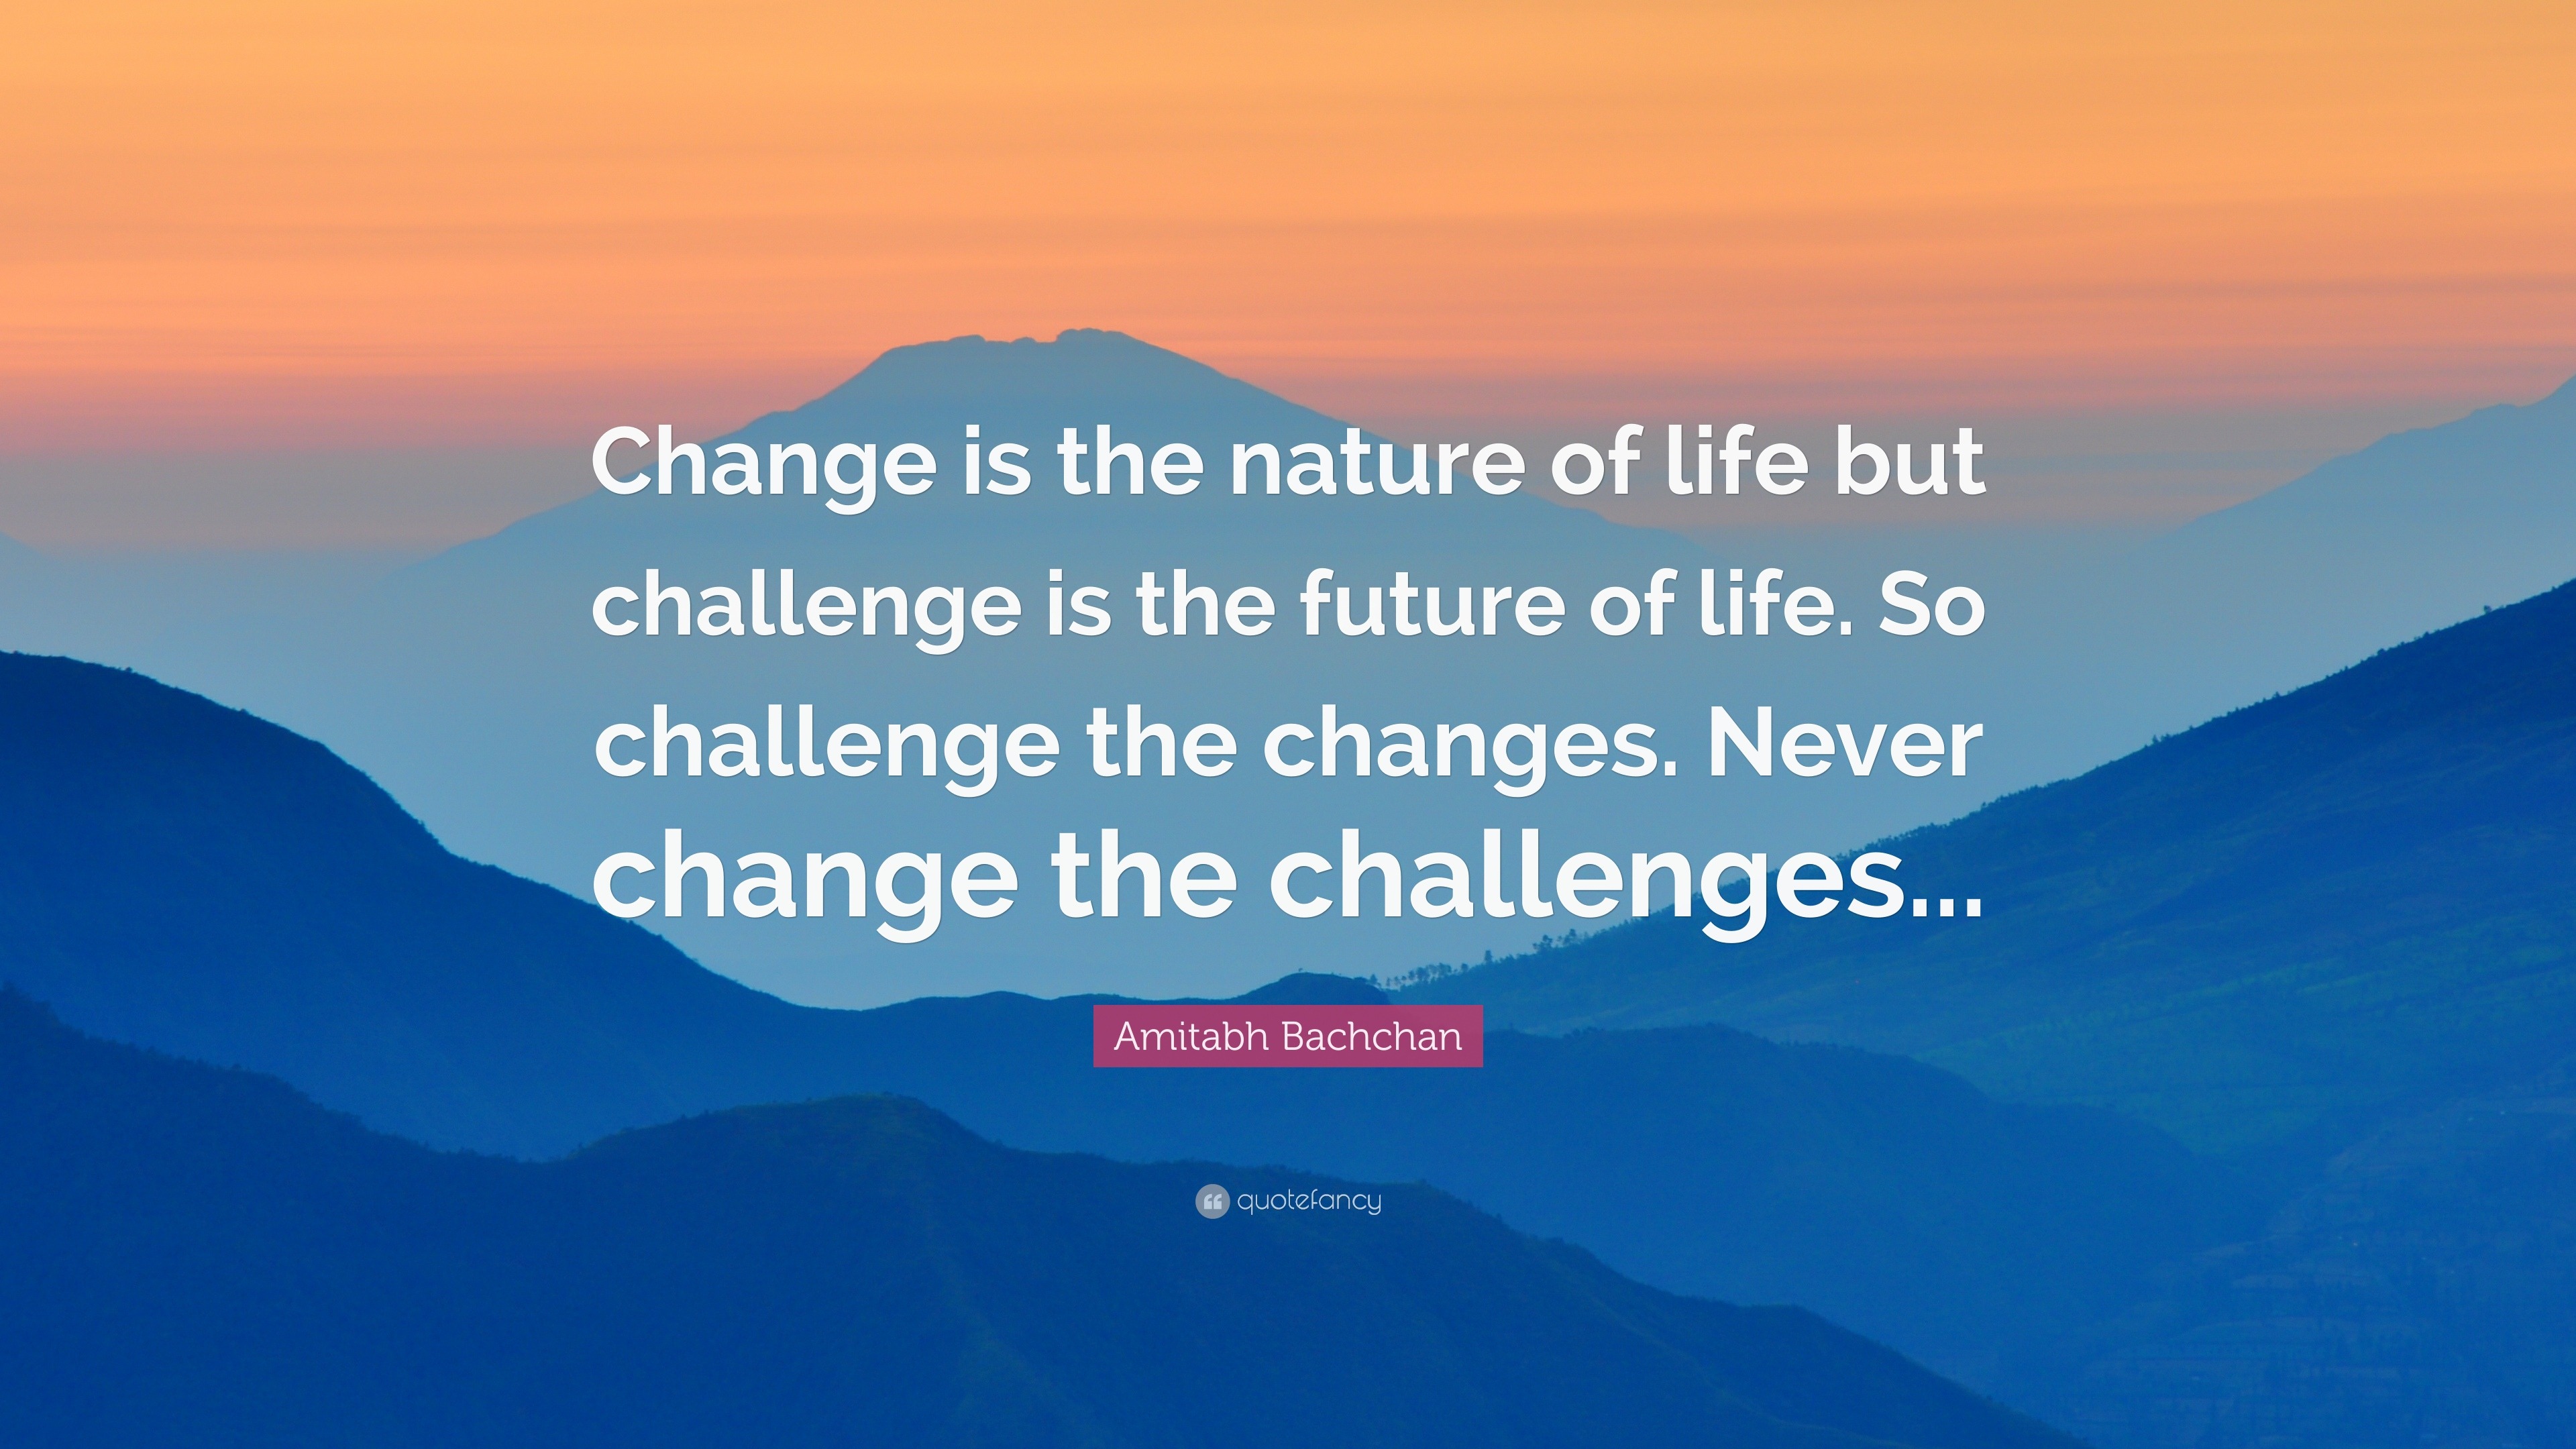 Amitabh Bachchan Quote: “Change is the nature of life but challenge is